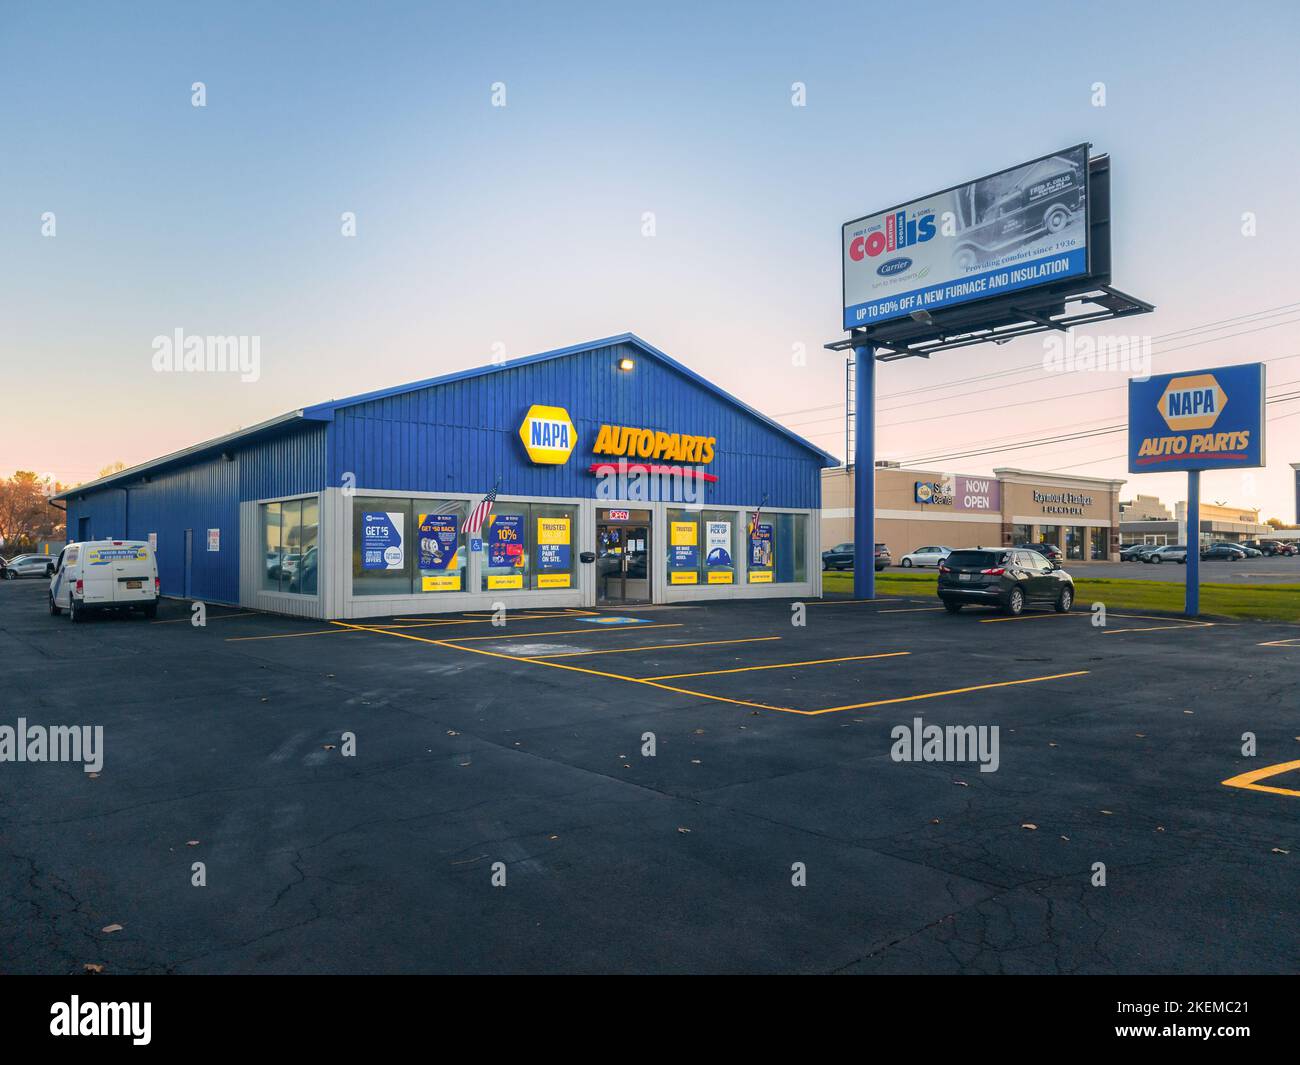 New Hartford, New York - Oct 27, 2022: Landscape Wide View of Napa Auto Parts Store Building Exterior. Stock Photo